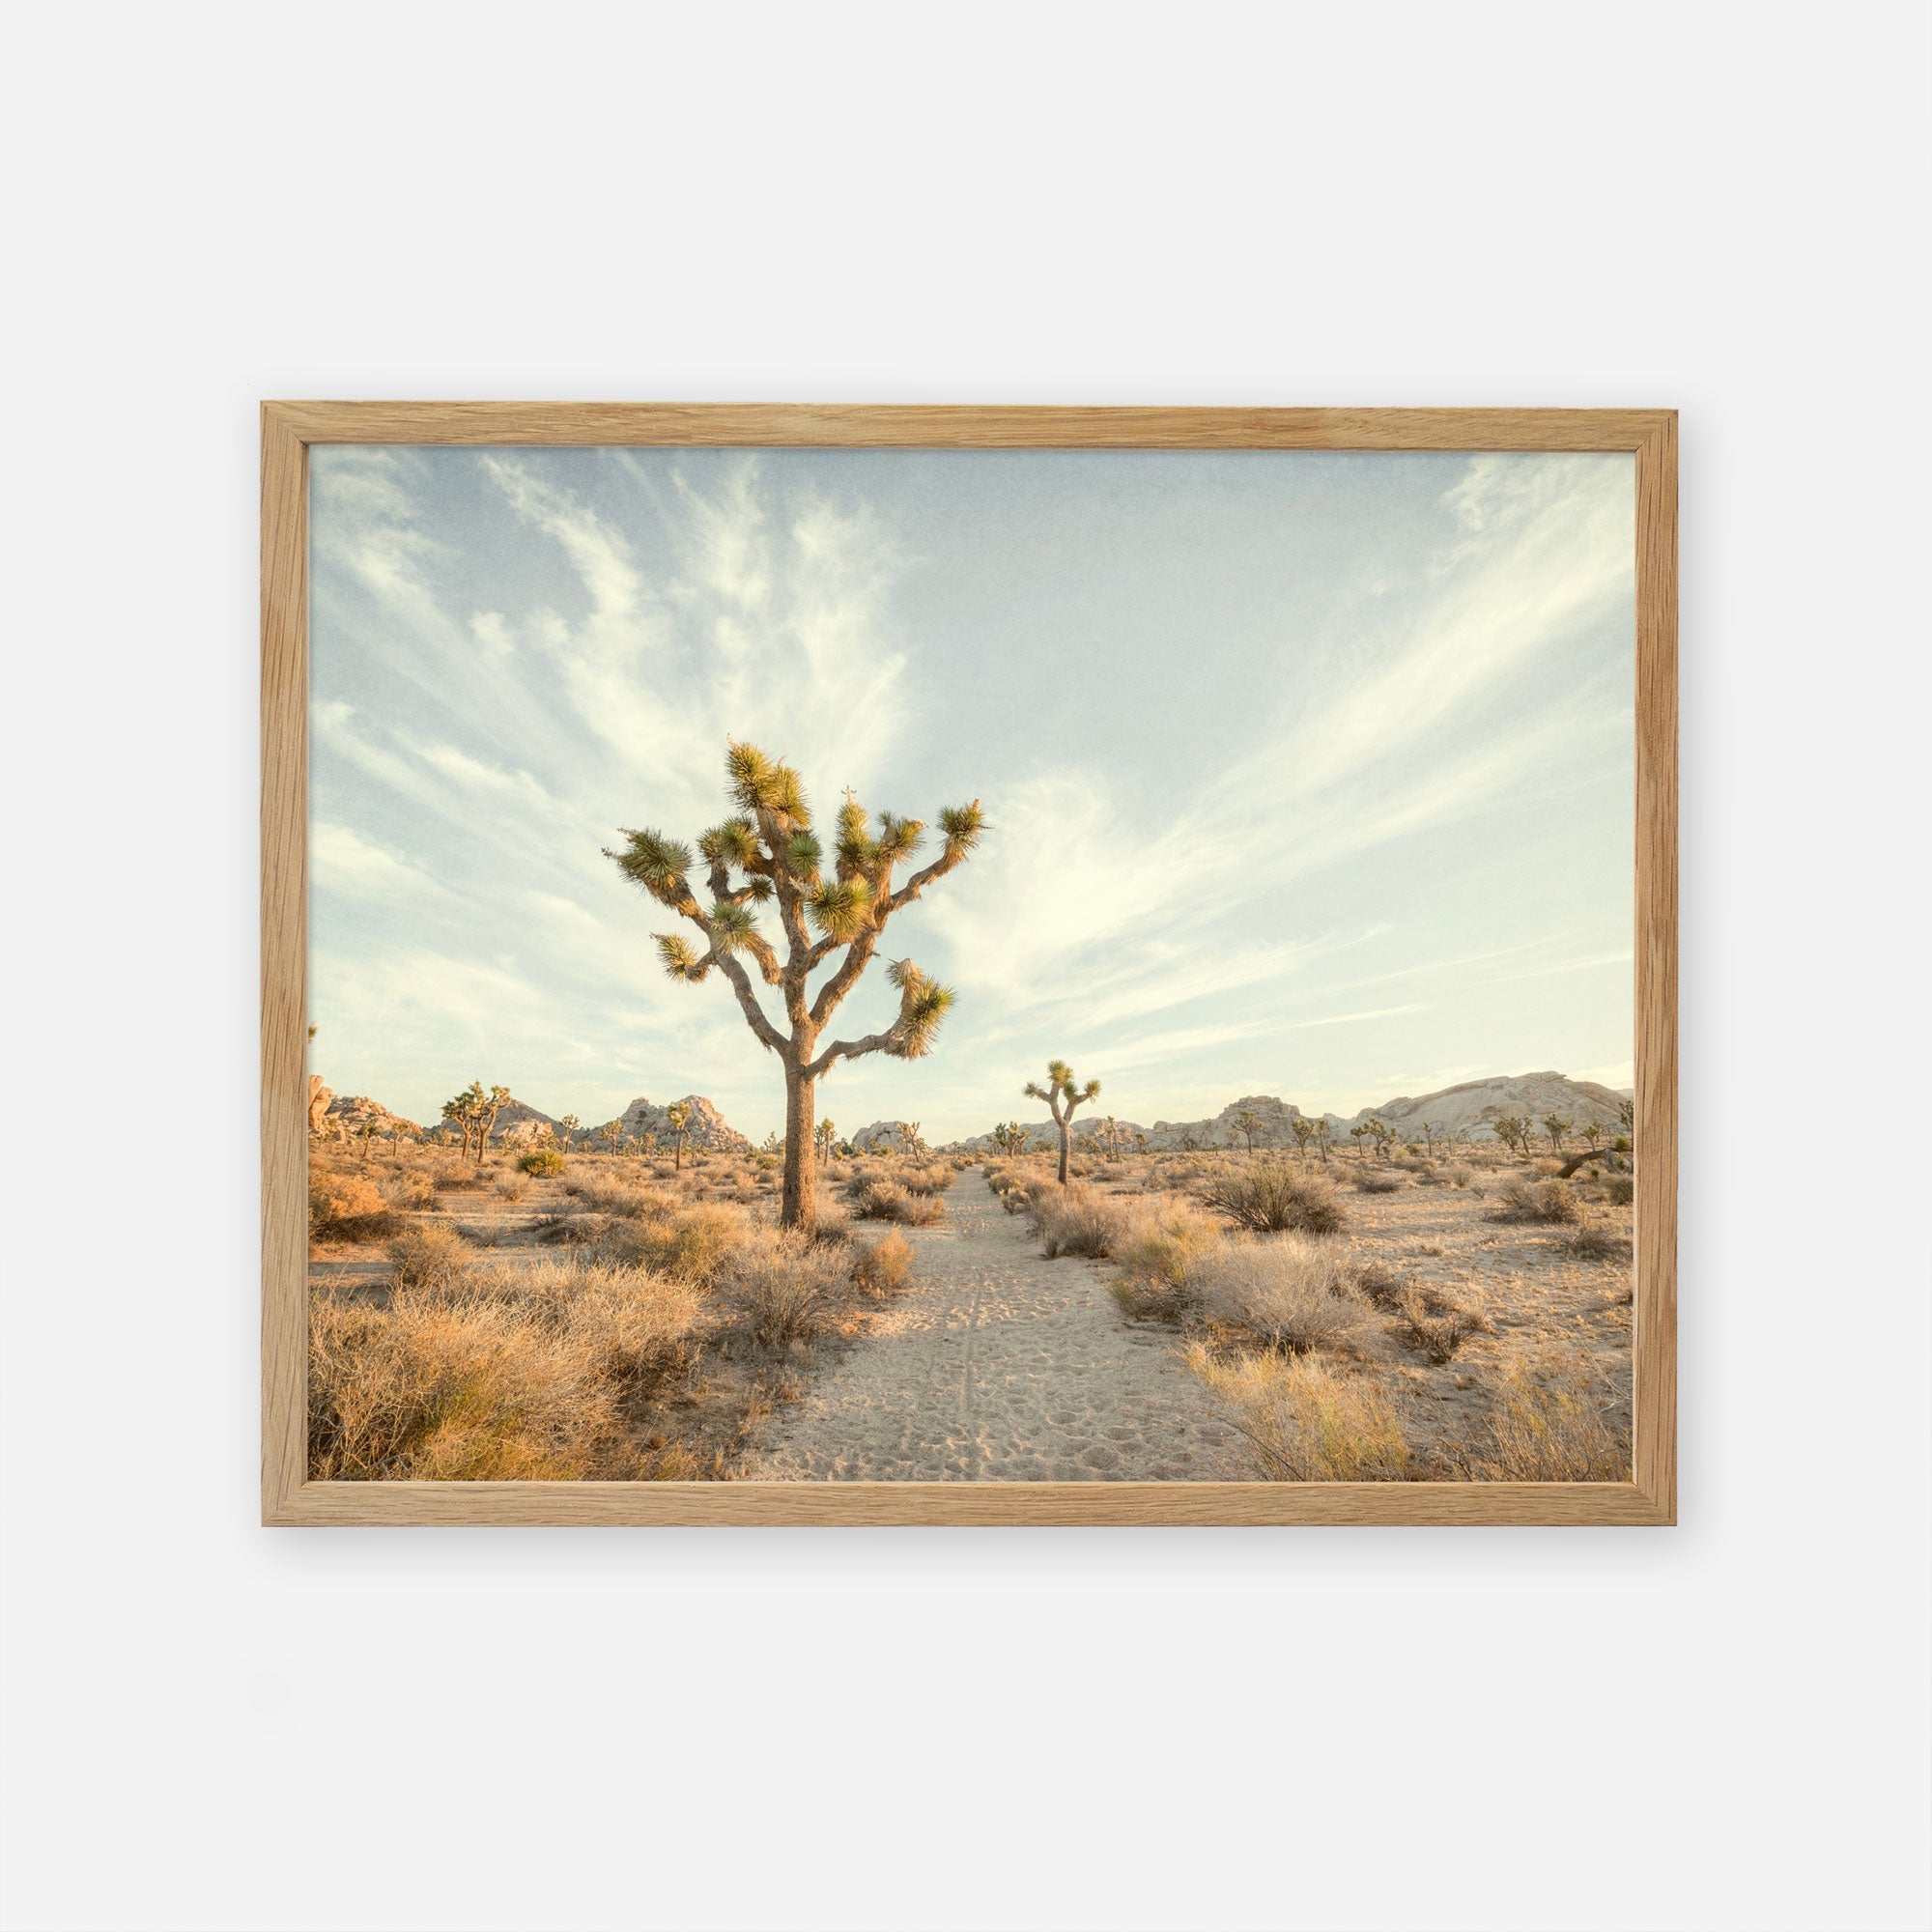 A framed image of a desert landscape featuring a dirt path leading through scrubby bushes and joshua trees under a clear sky, printed on archival photographic paper. The scene conveys a serene, natural Offley Green Joshua Tree Print, &#39;Path to Joshua&#39;.